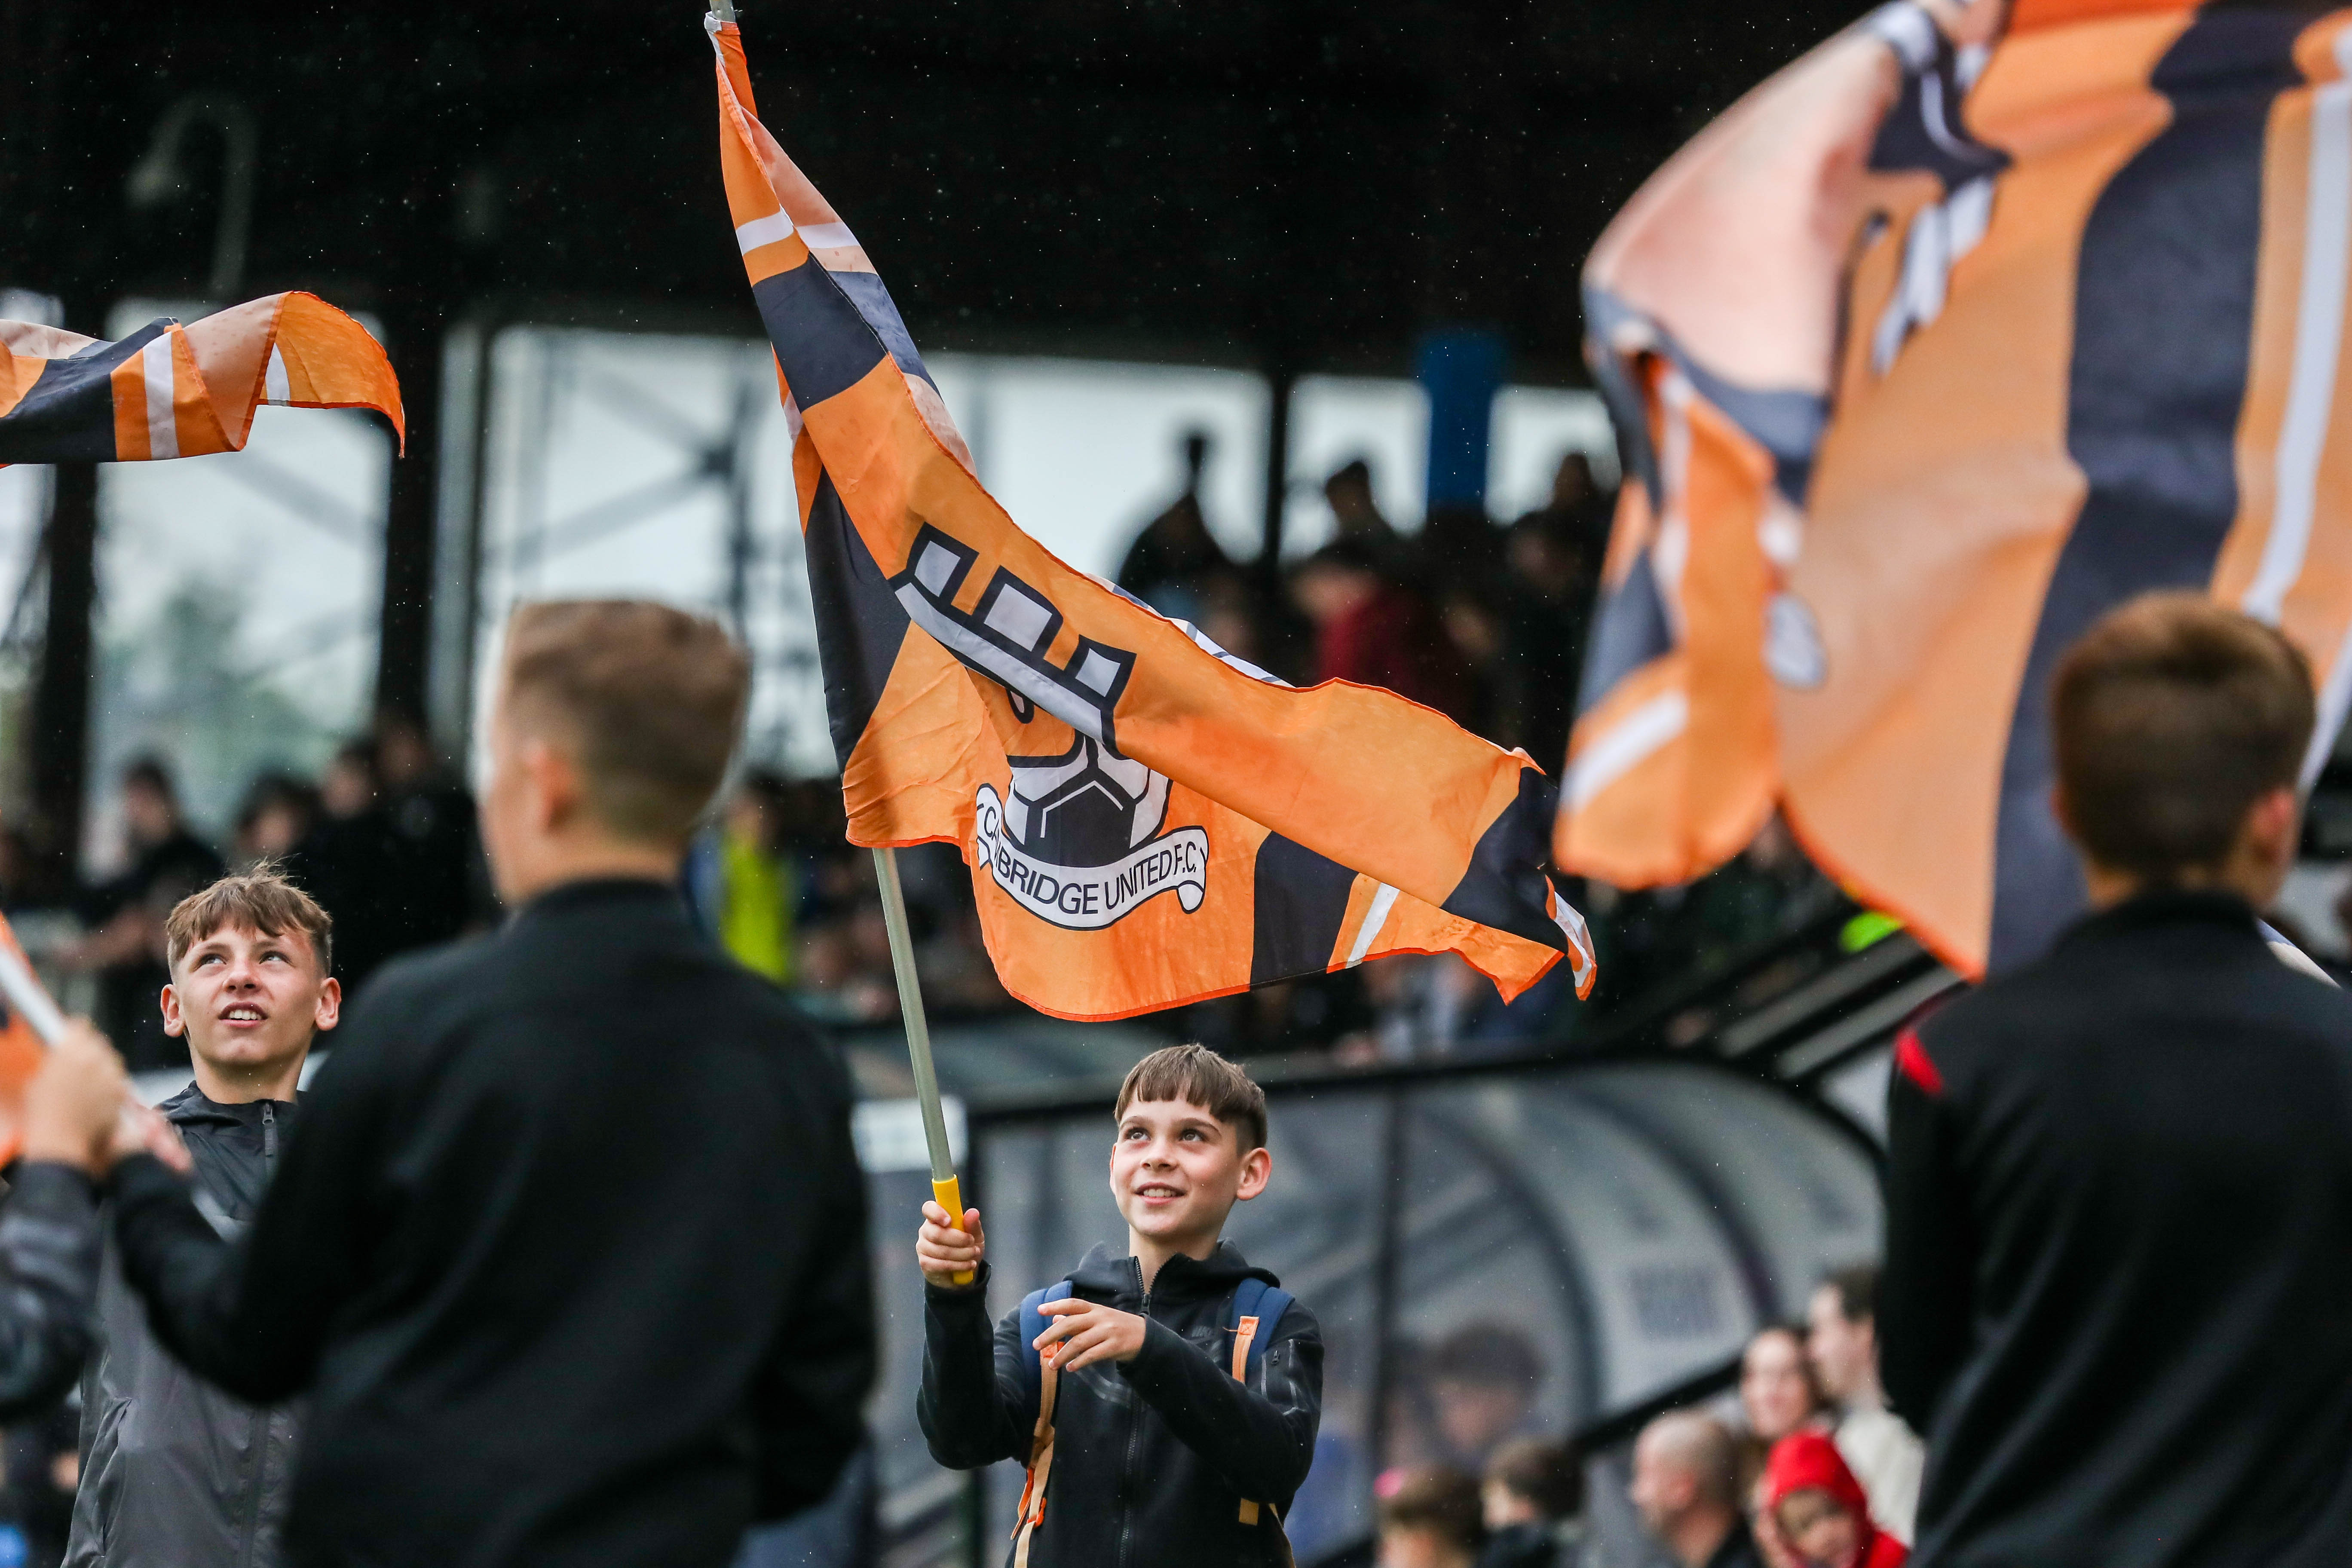 A young fan waves his flag ahead of kick-off